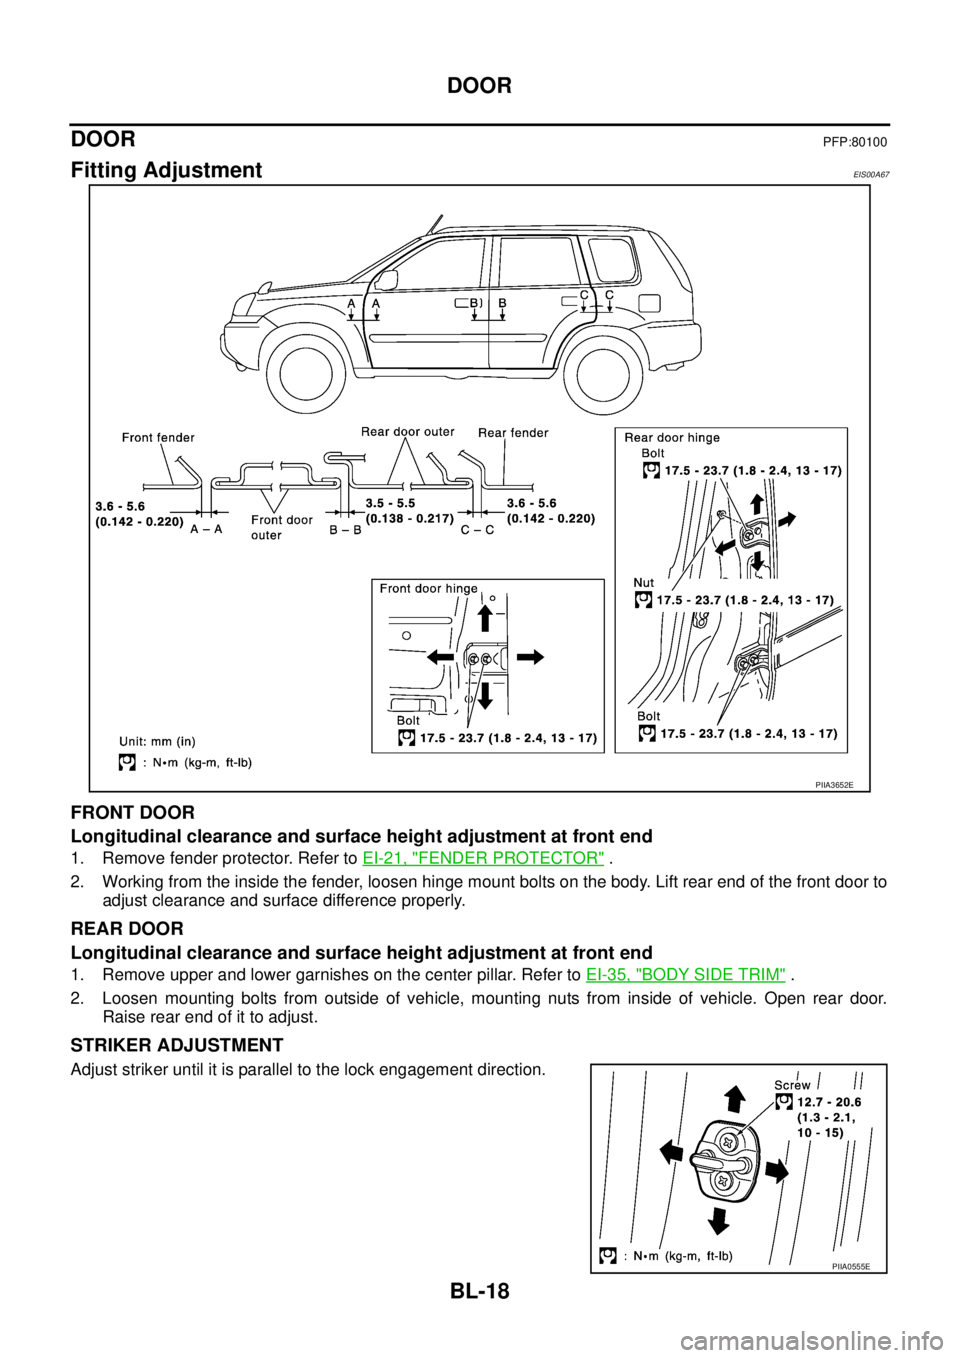 NISSAN X-TRAIL 2003  Service Repair Manual BL-18
DOOR
 
DOORPFP:80100
Fitting AdjustmentEIS00A67
FRONT DOOR
Longitudinal clearance and surface height adjustment at front end
1. Remove fender protector. Refer to EI-21, "FENDER PROTECTOR" .
2. W